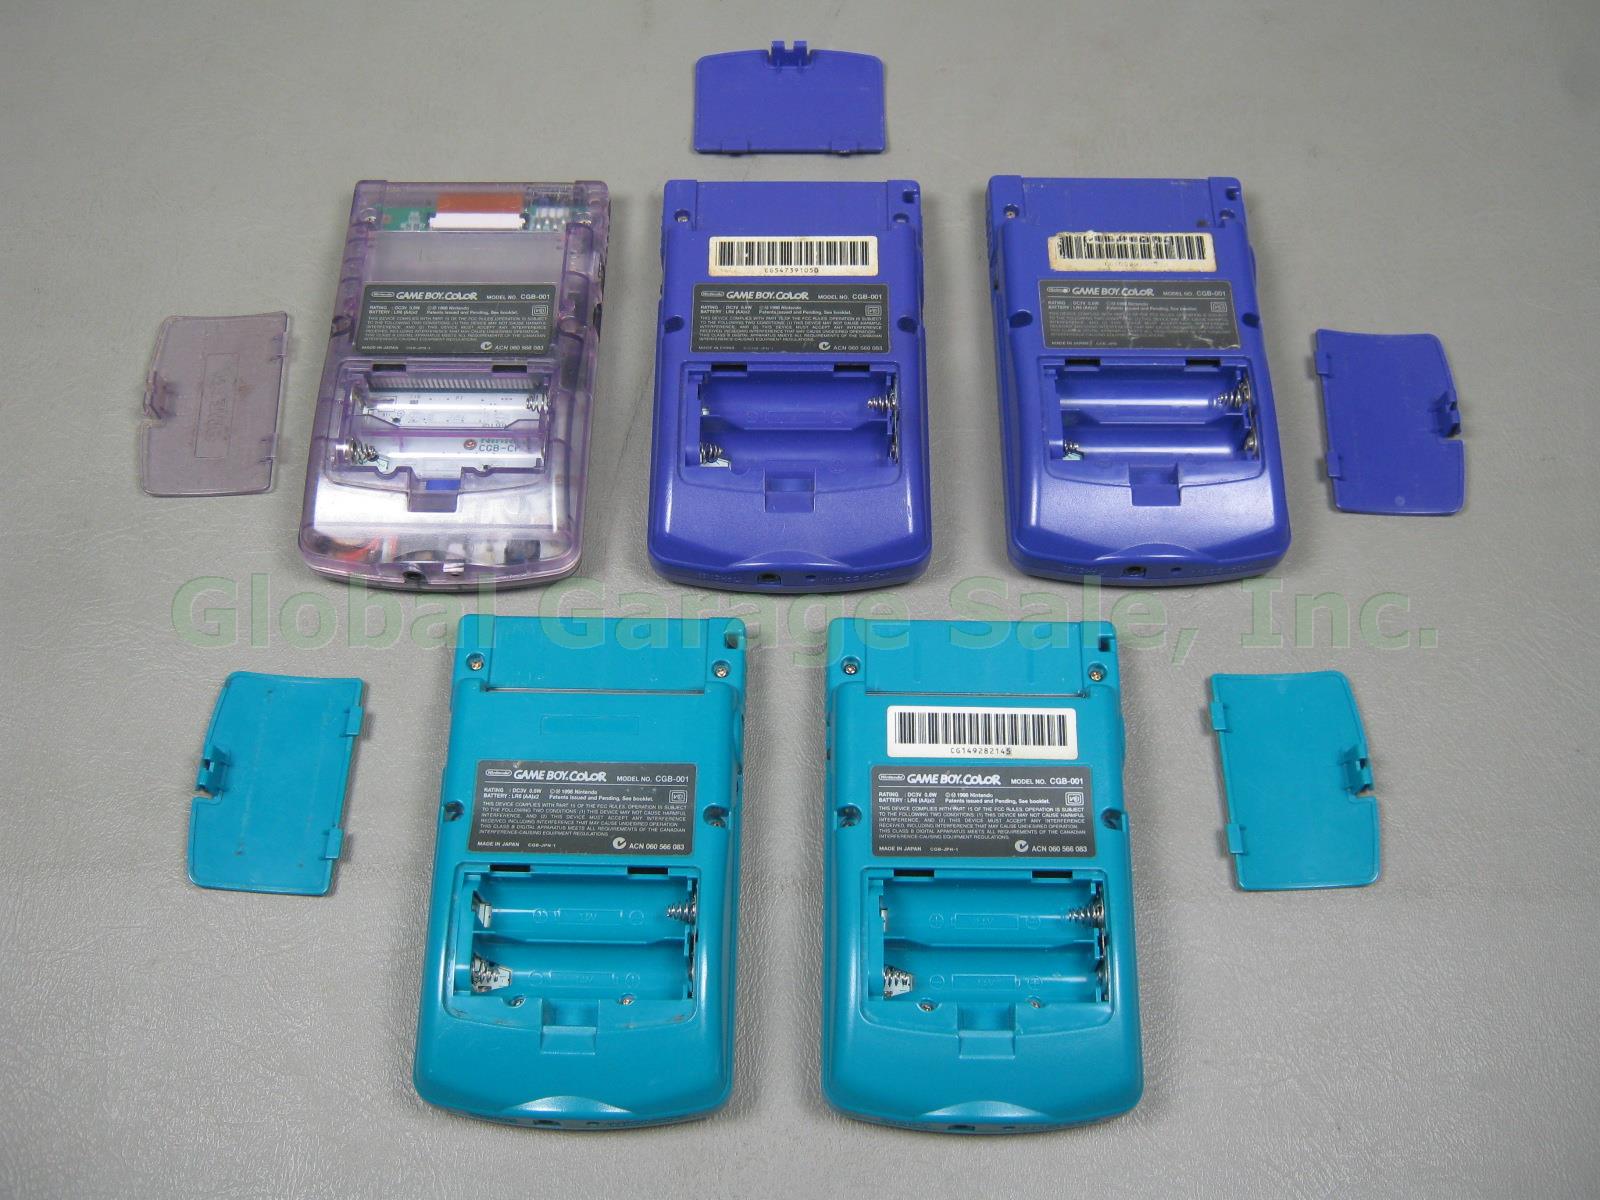 5 Tested Nintendo Gameboy Color GBC CGB-001 Console Lot Atomic Purple Grape Teal 7